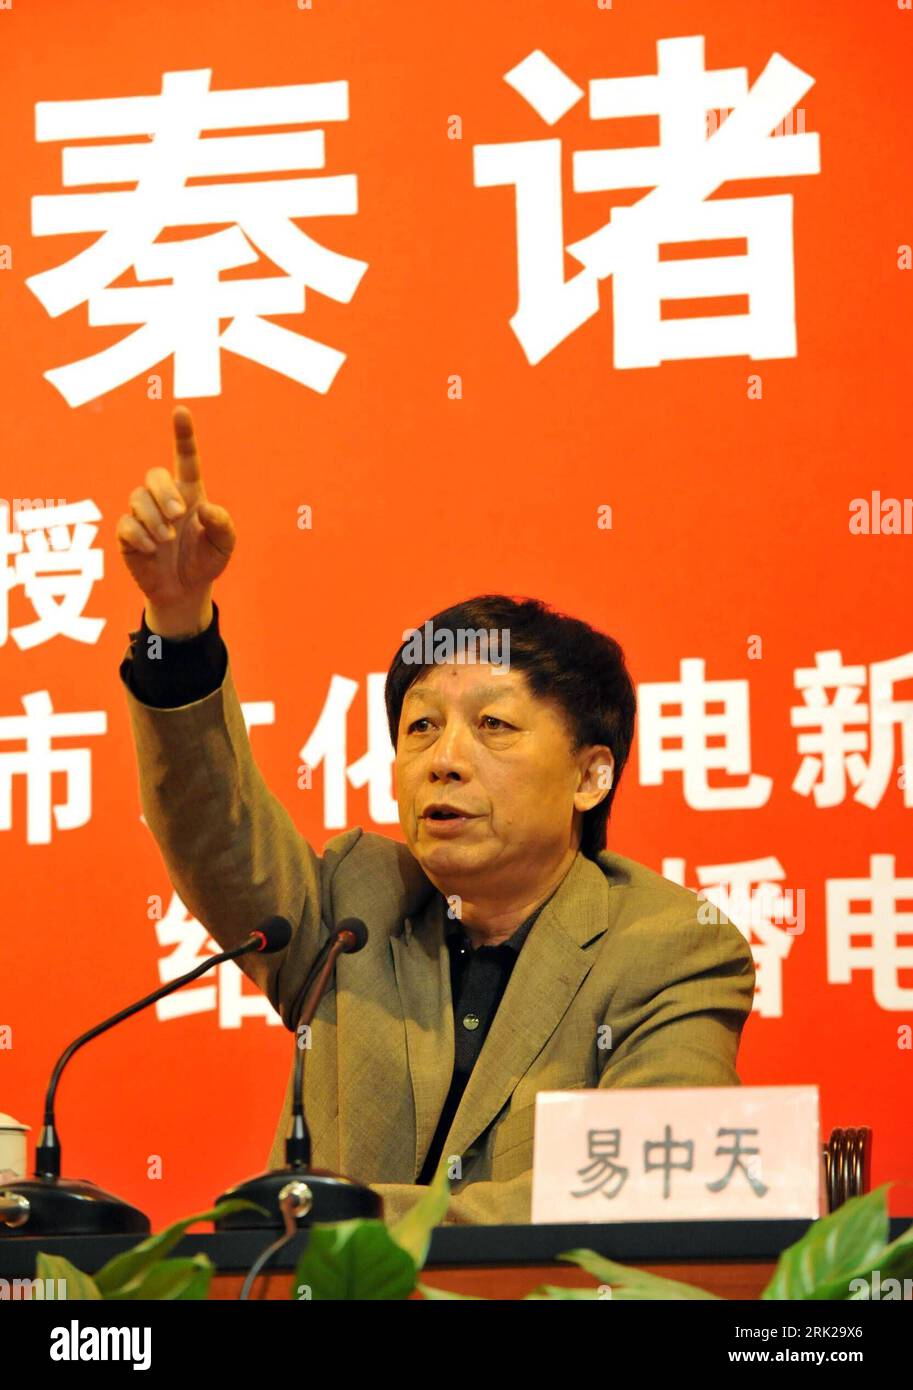 Bildnummer: 53154621  Datum: 29.03.2009  Copyright: imago/Xinhua  Yi Zhongtian, a professor with the Xiamen Univeristy and a currently popular TV lecturer, imparts on a topic of Lu Xun and Philosophic Thinkers of Various Schools of Pre-Qin Dynasties, in Shaoxing, east China s Zhejiang Province, March 28, 2009.       kbdig   People, Wissenschaft hoch    Image number 53154621 Date 29 03 2009 Copyright Imago XINHUA Yi Zhongtian a Professor With The Xiamen University and a currently Popular TV lecturer imparts ON a Topic of Lu Xun and Philosophic Thinkers of Various Schools of Pre Qin Dynasties in Stock Photo